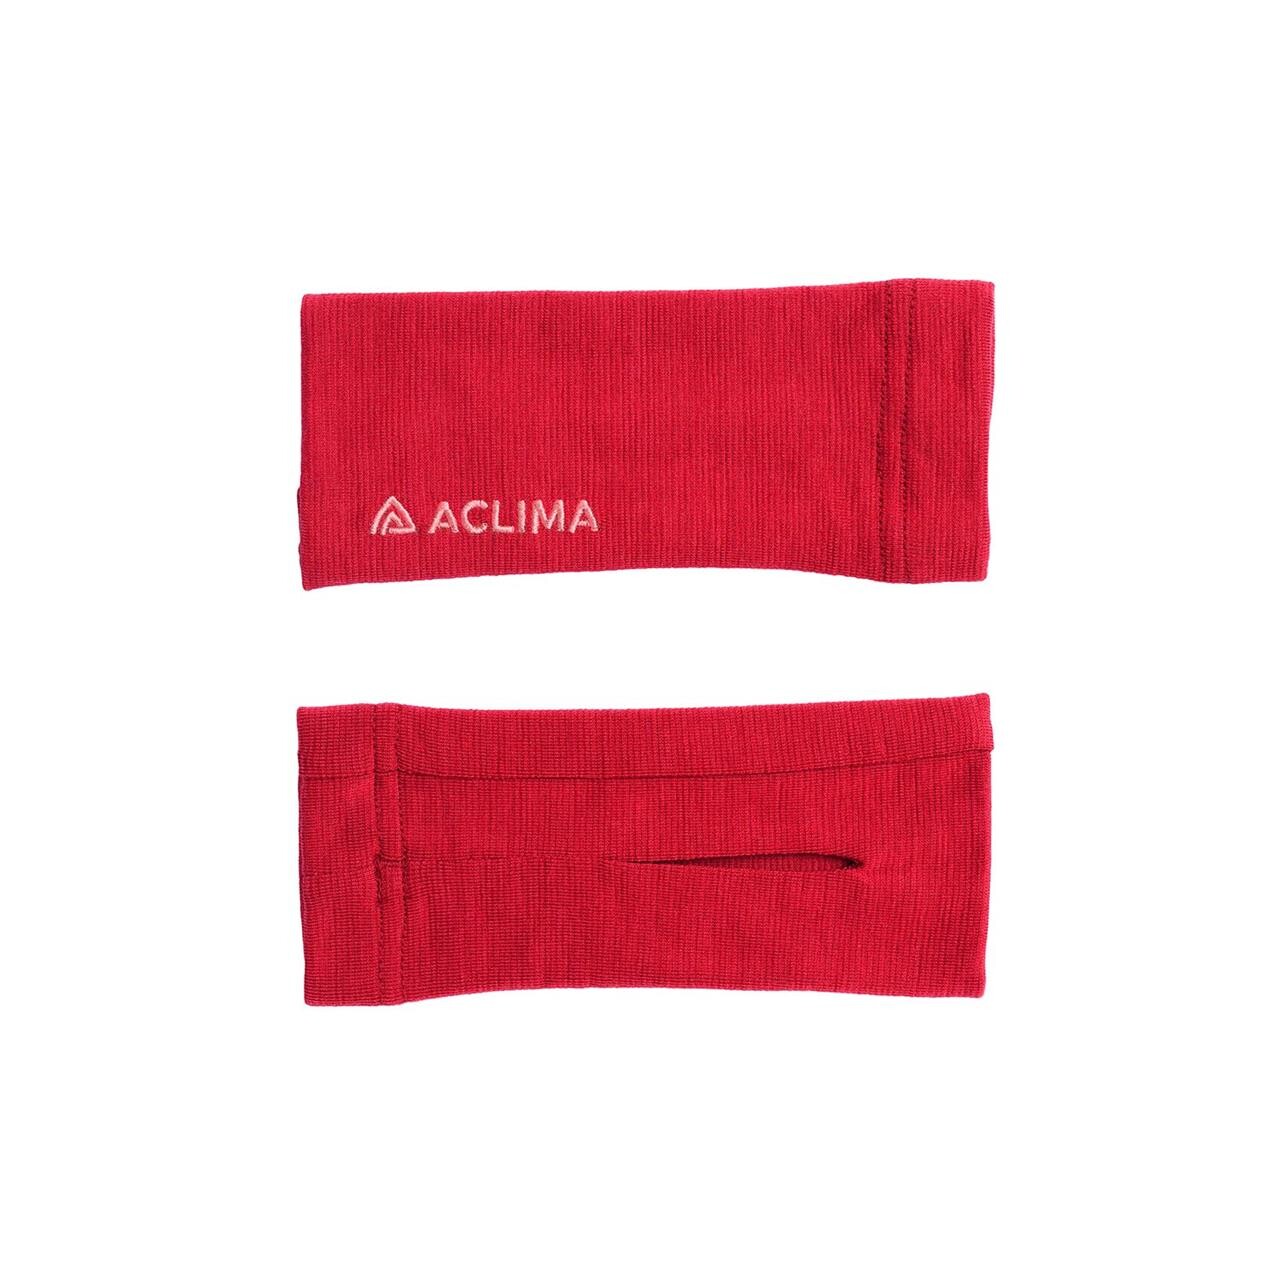 Aclima Warmwool Pulseheater (Rød (JESTER RED) One size)